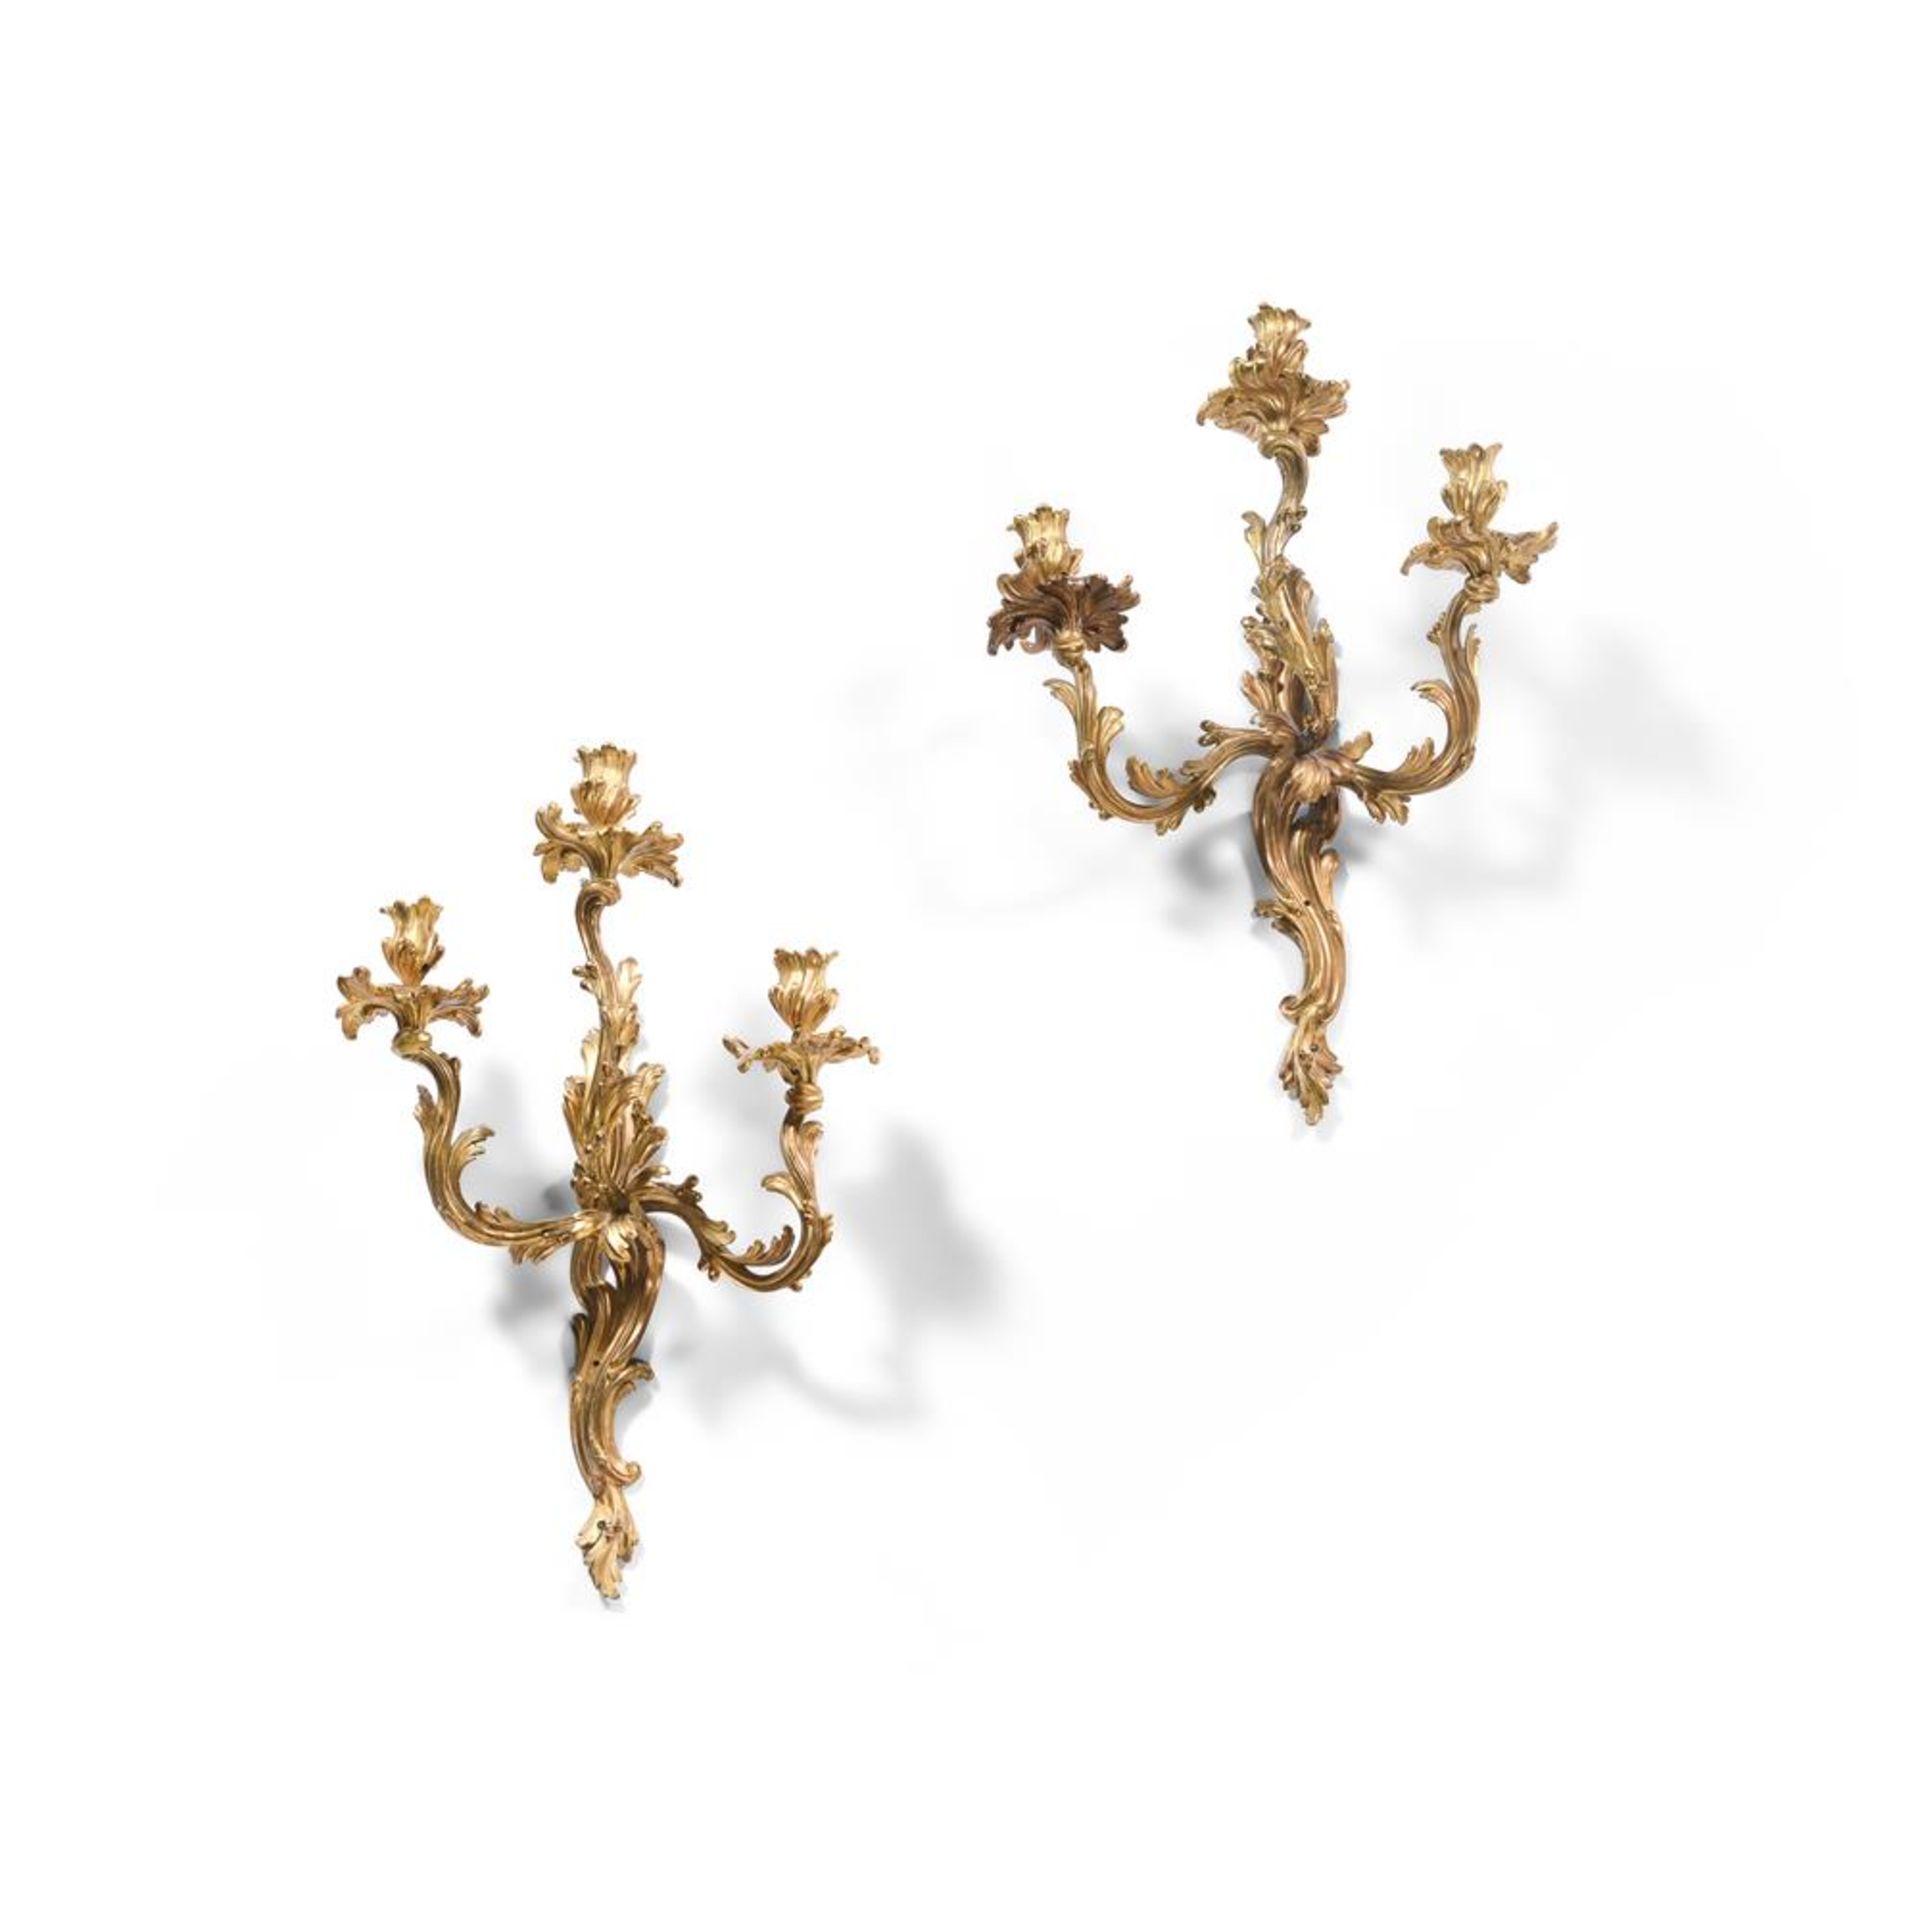 A LARGE PAIR OF FRENCH ORMOLU WALL LIGHTS, 18TH OR 19TH CENTURY